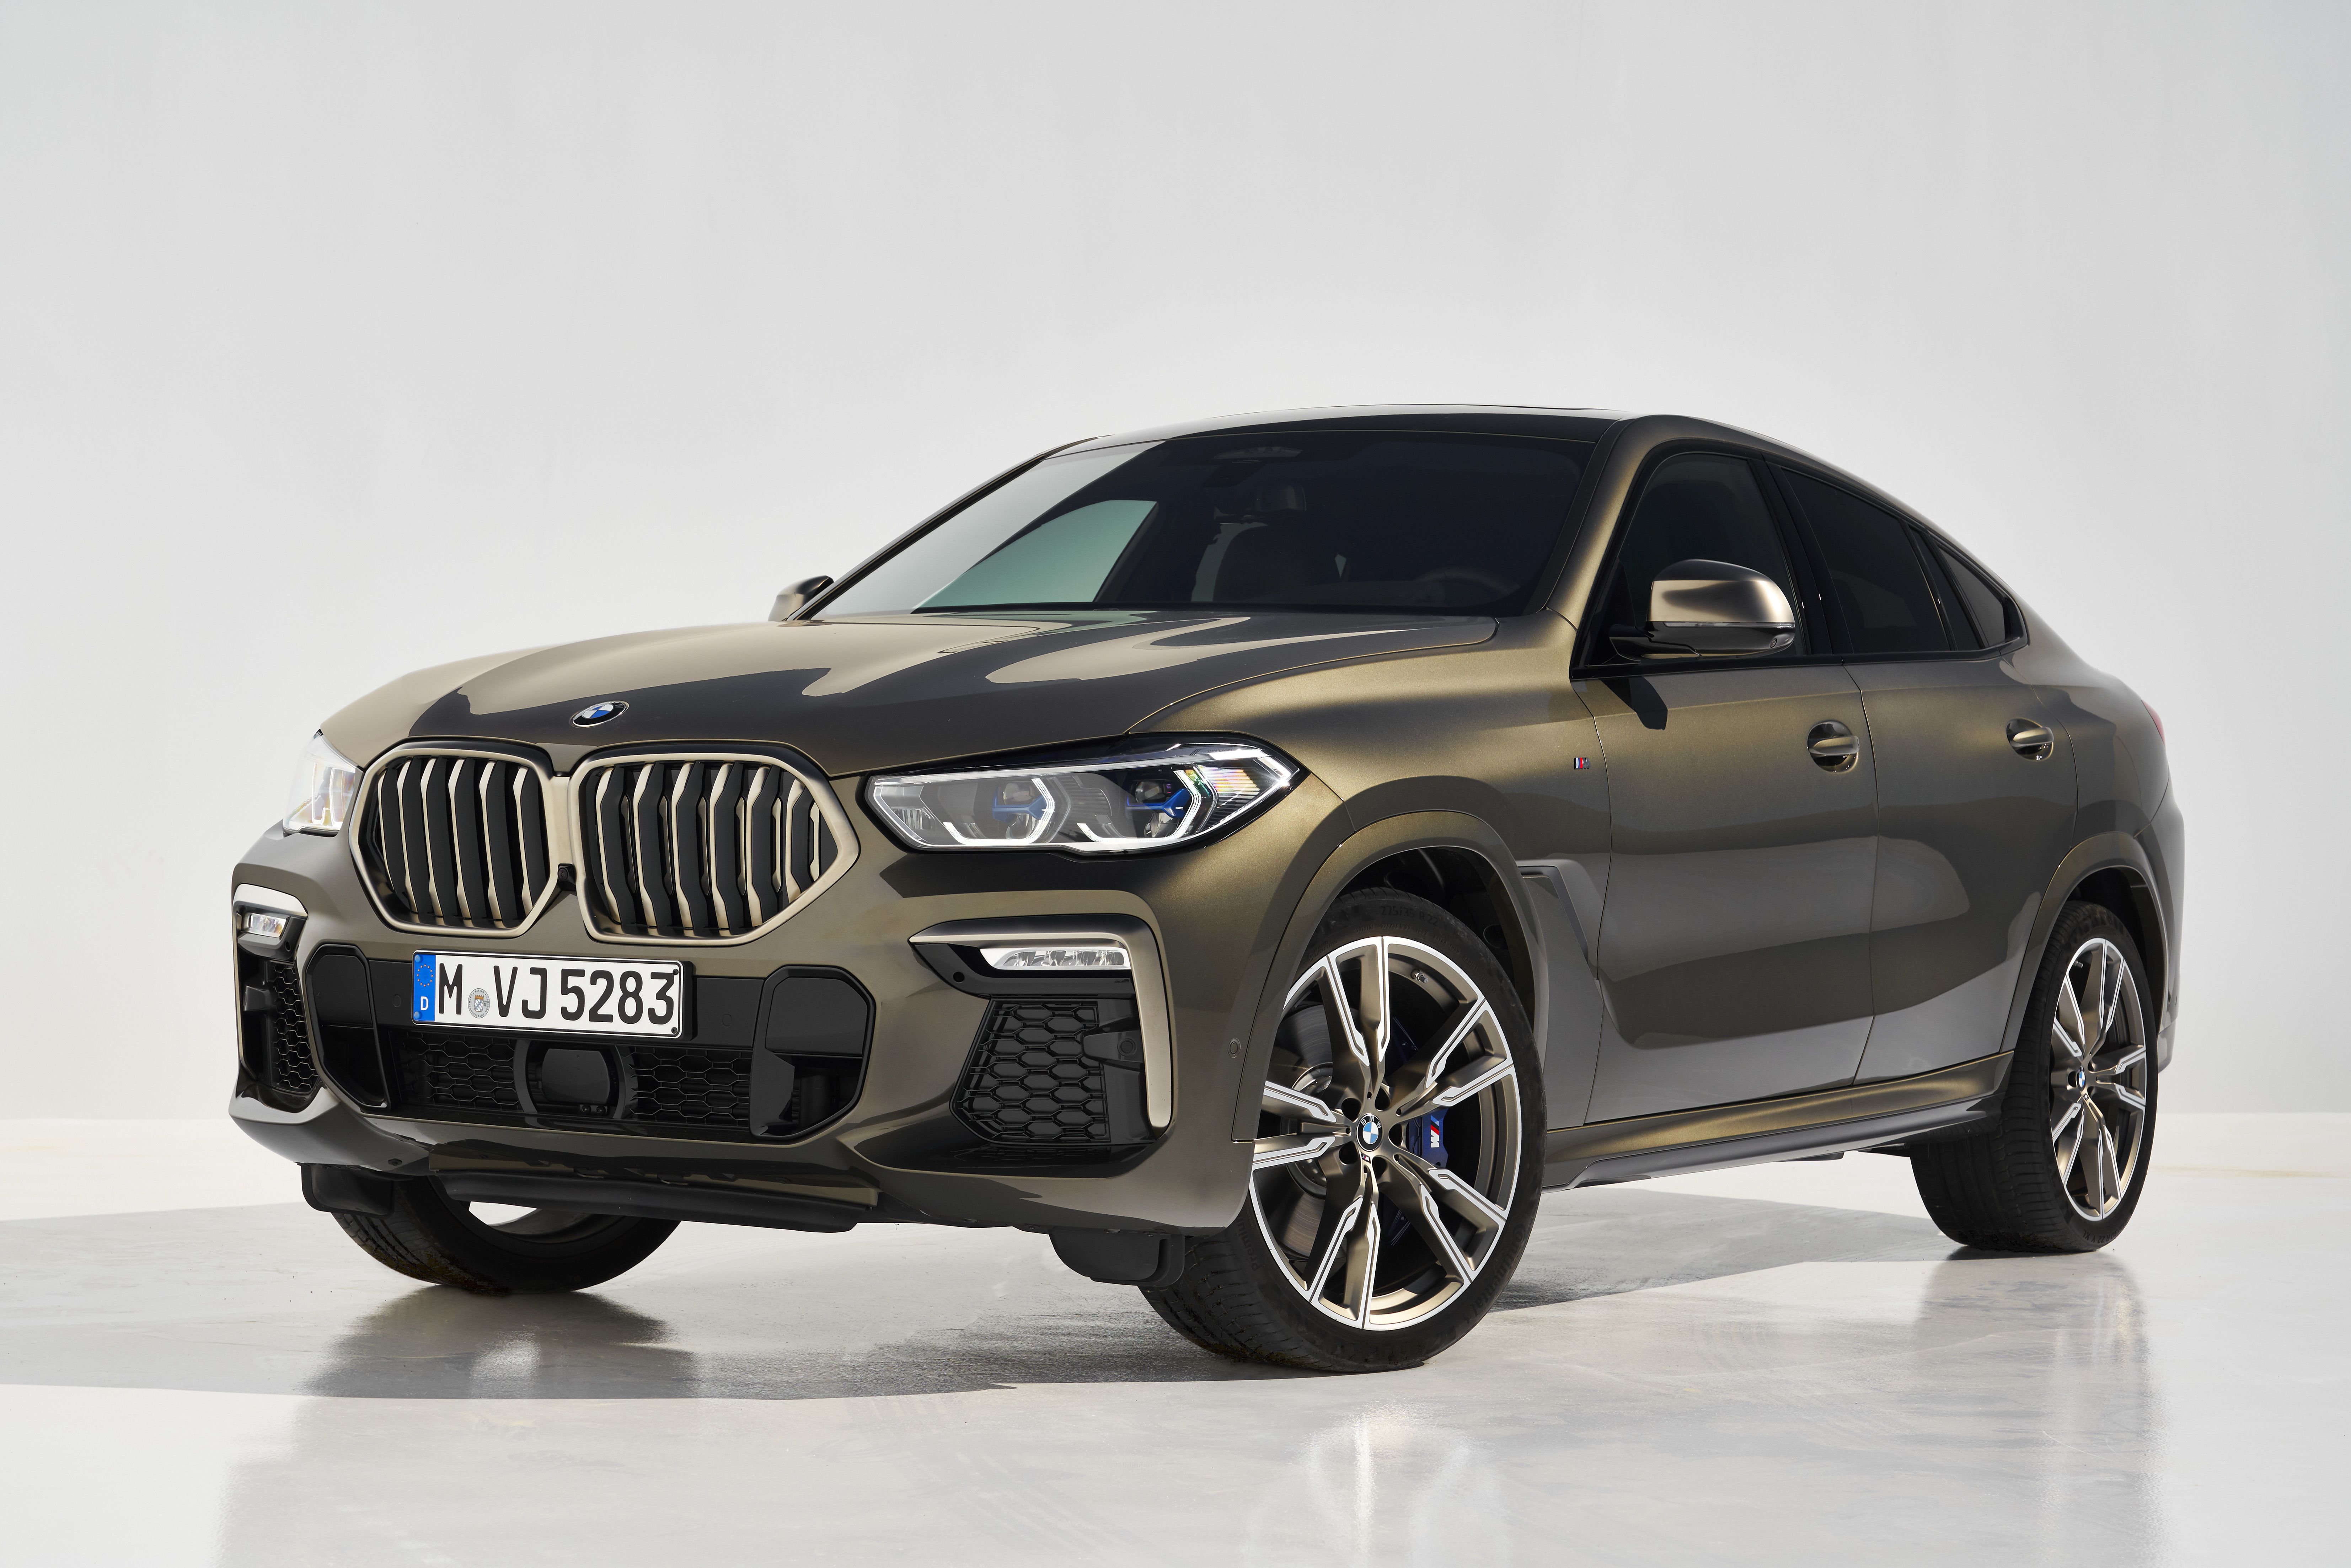 Geheugen Mainstream vlot The 2020 BMW X6 Is Bigger, Quicker, and Still Ridiculous